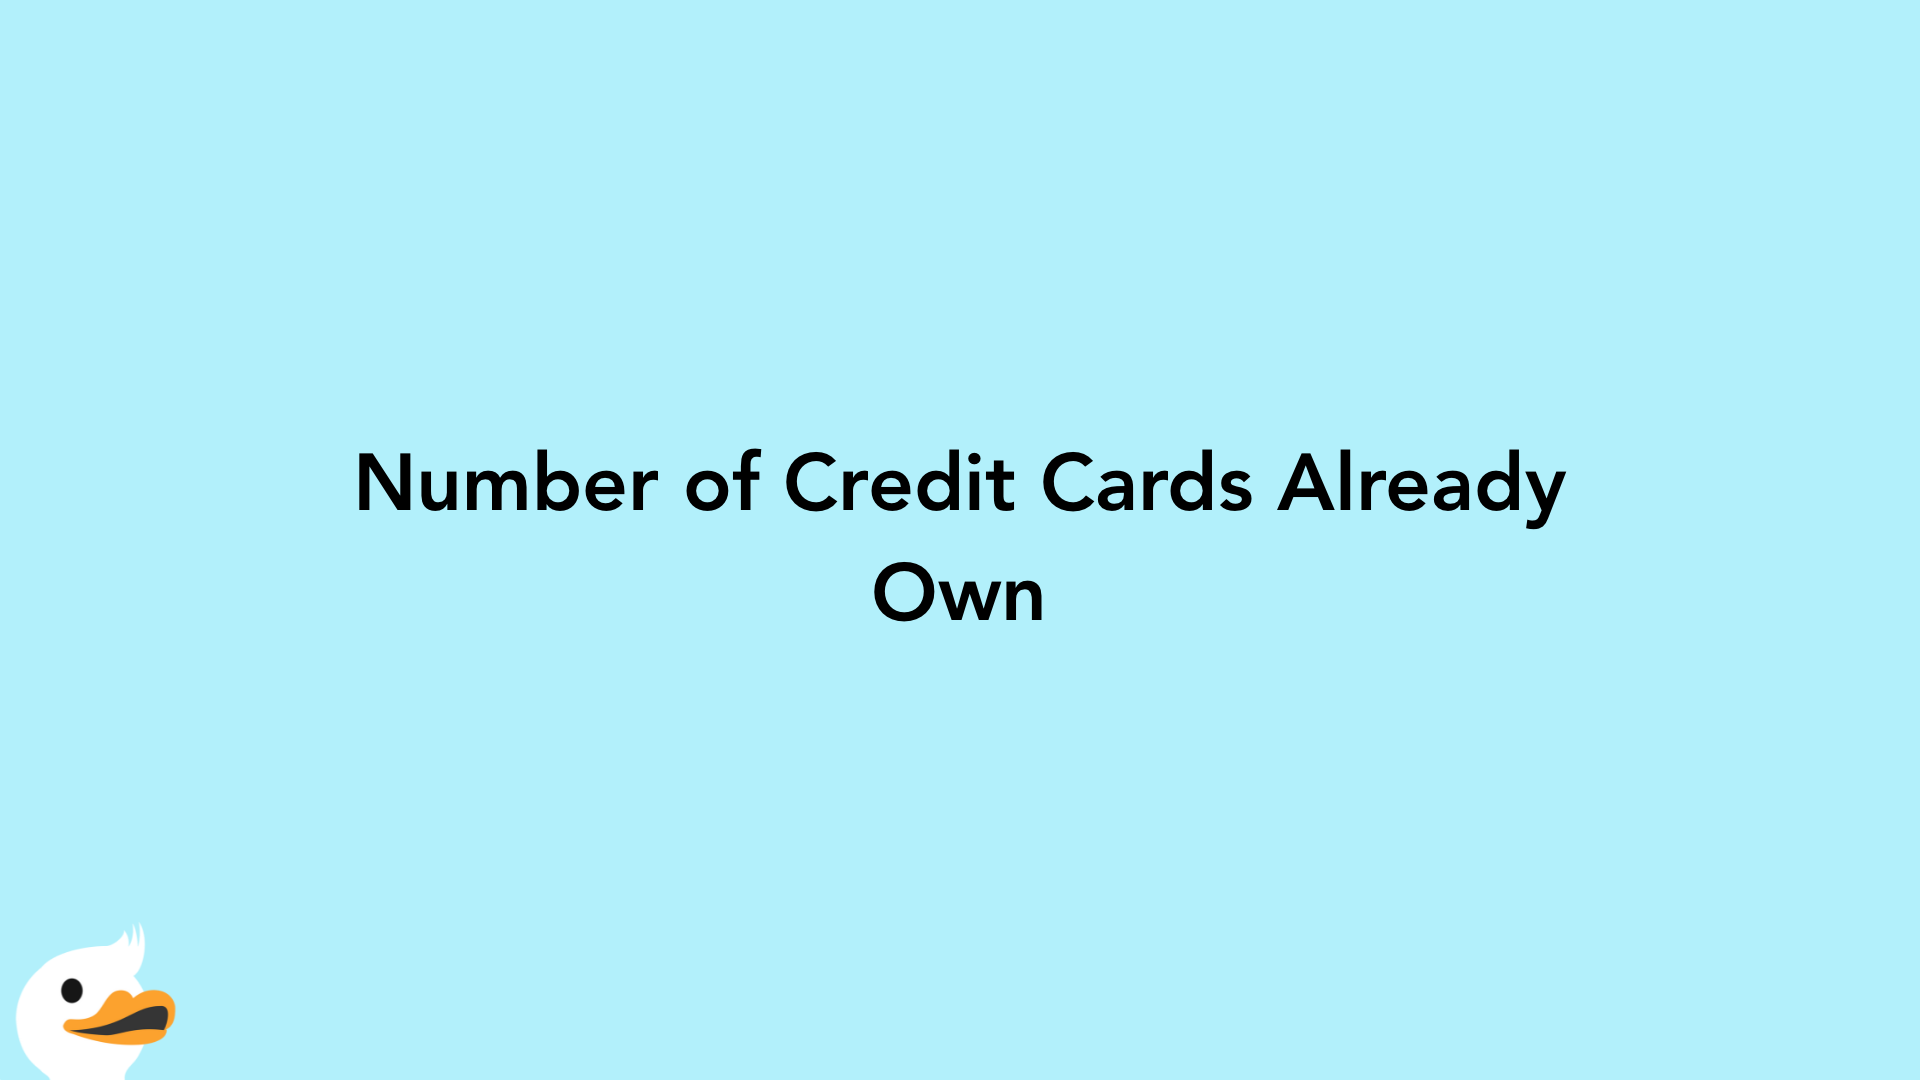 Number of Credit Cards Already Own